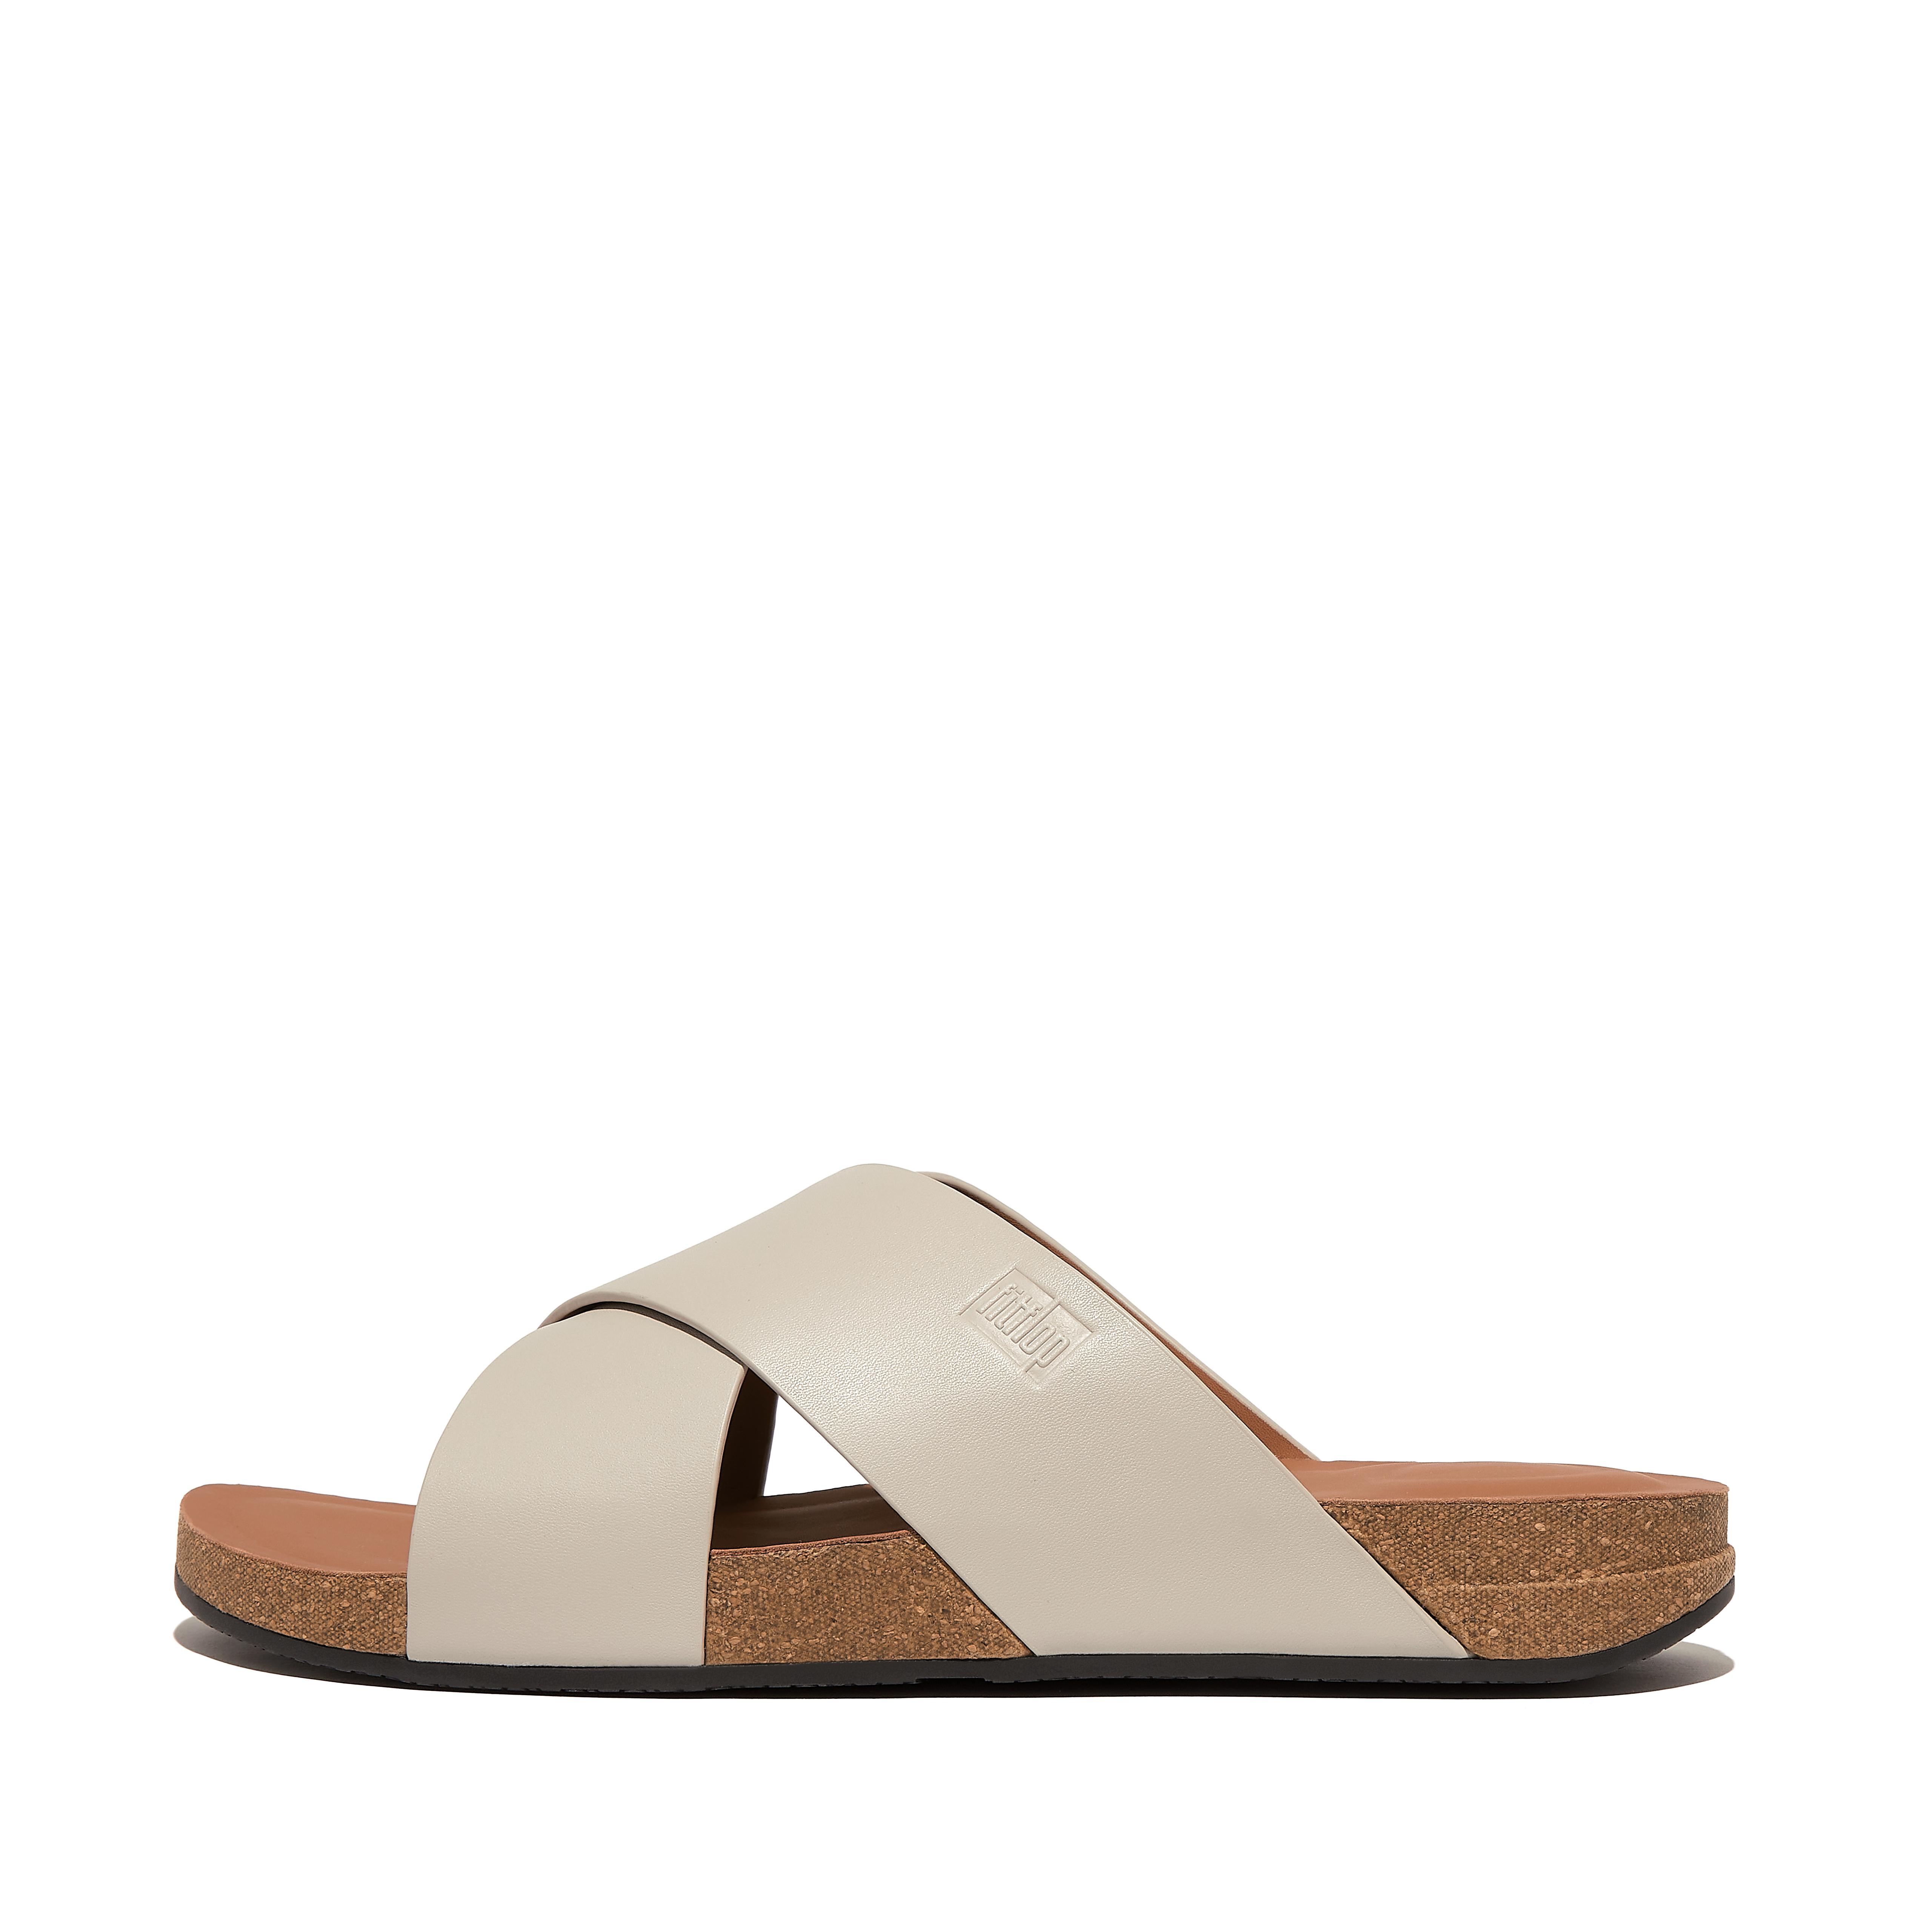 Men's Iqushion Leather Flip-Flops | FitFlop US